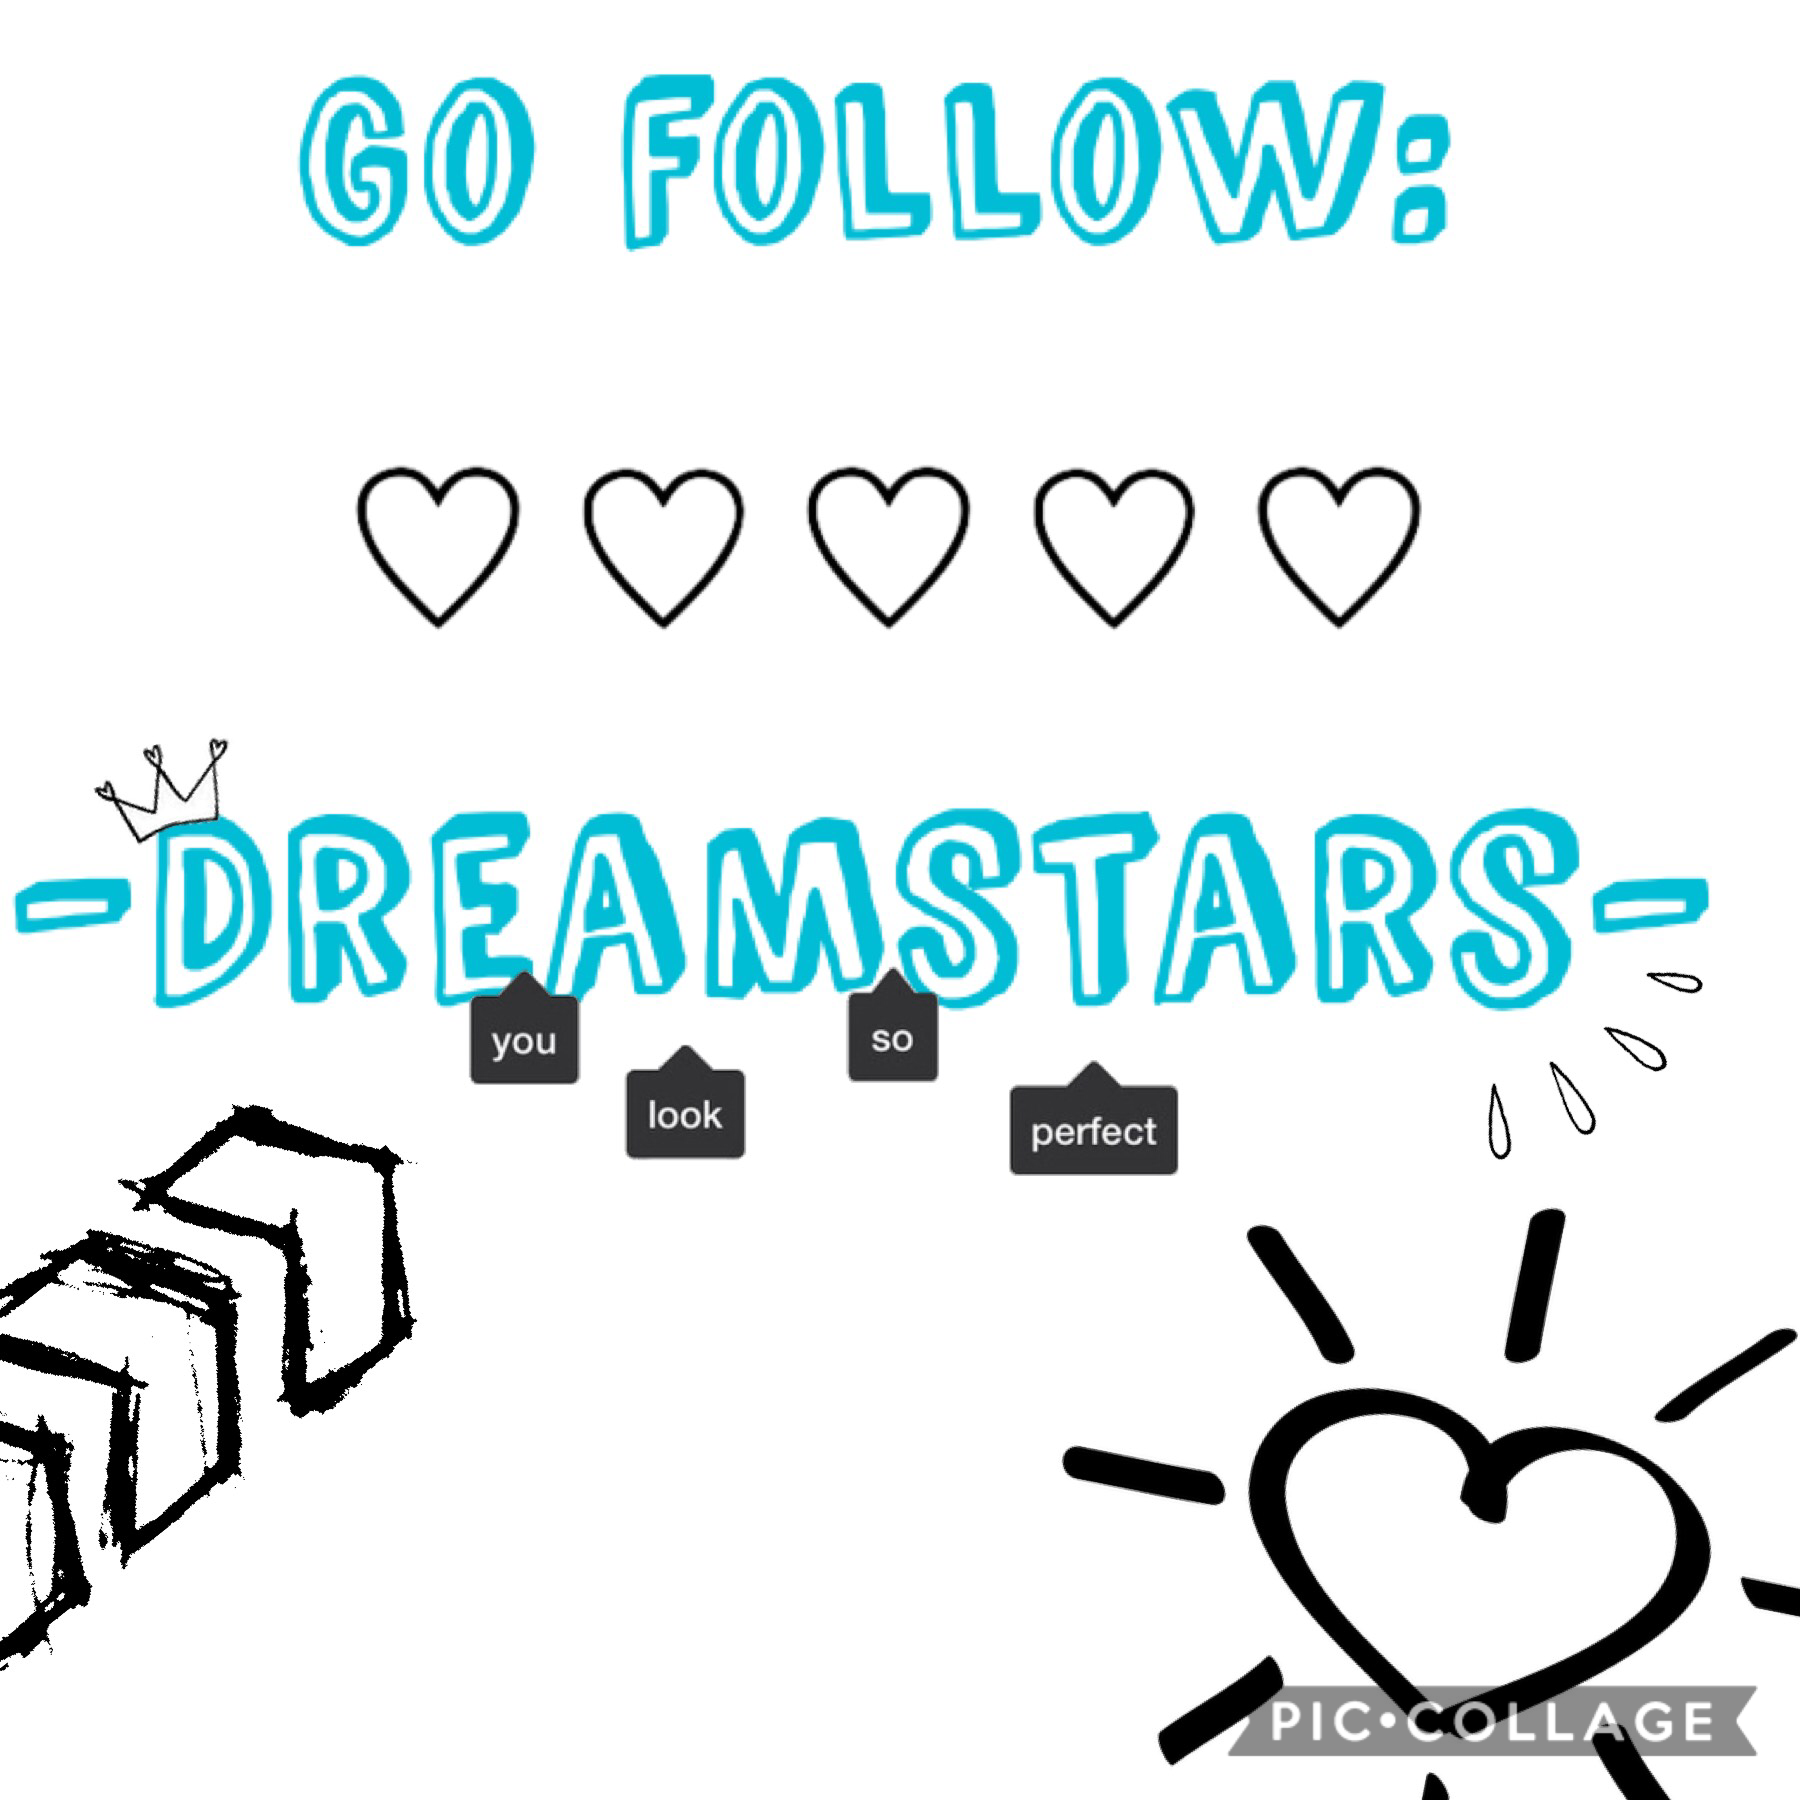 -DreamStars- is the most amazing person, she is so sweet and kind and makes the coolest, most detailed, most inspiring collages I’ve seen! 